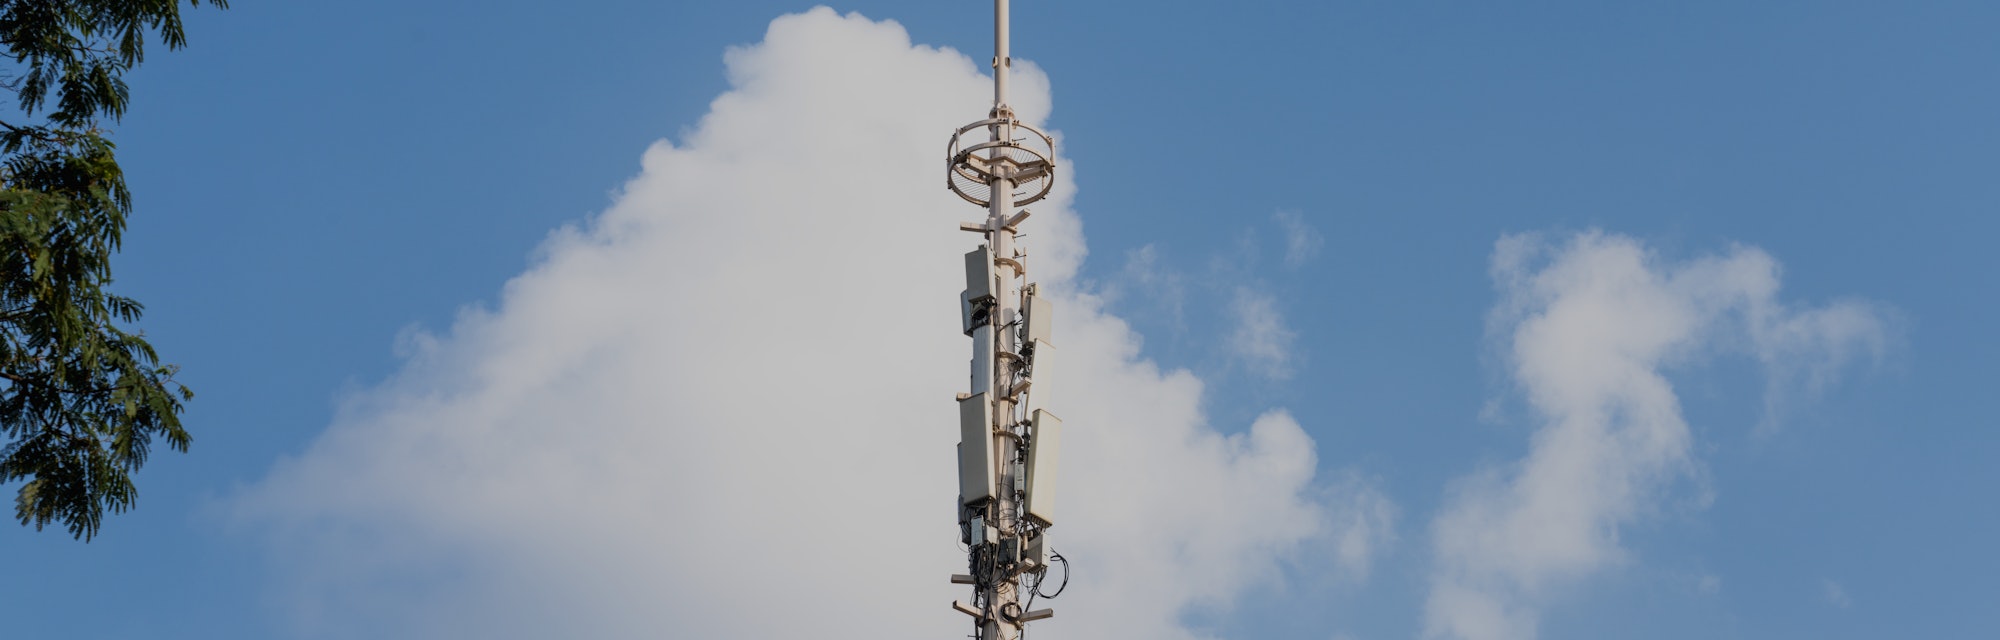 Cellular network tower in front of a blue sky.